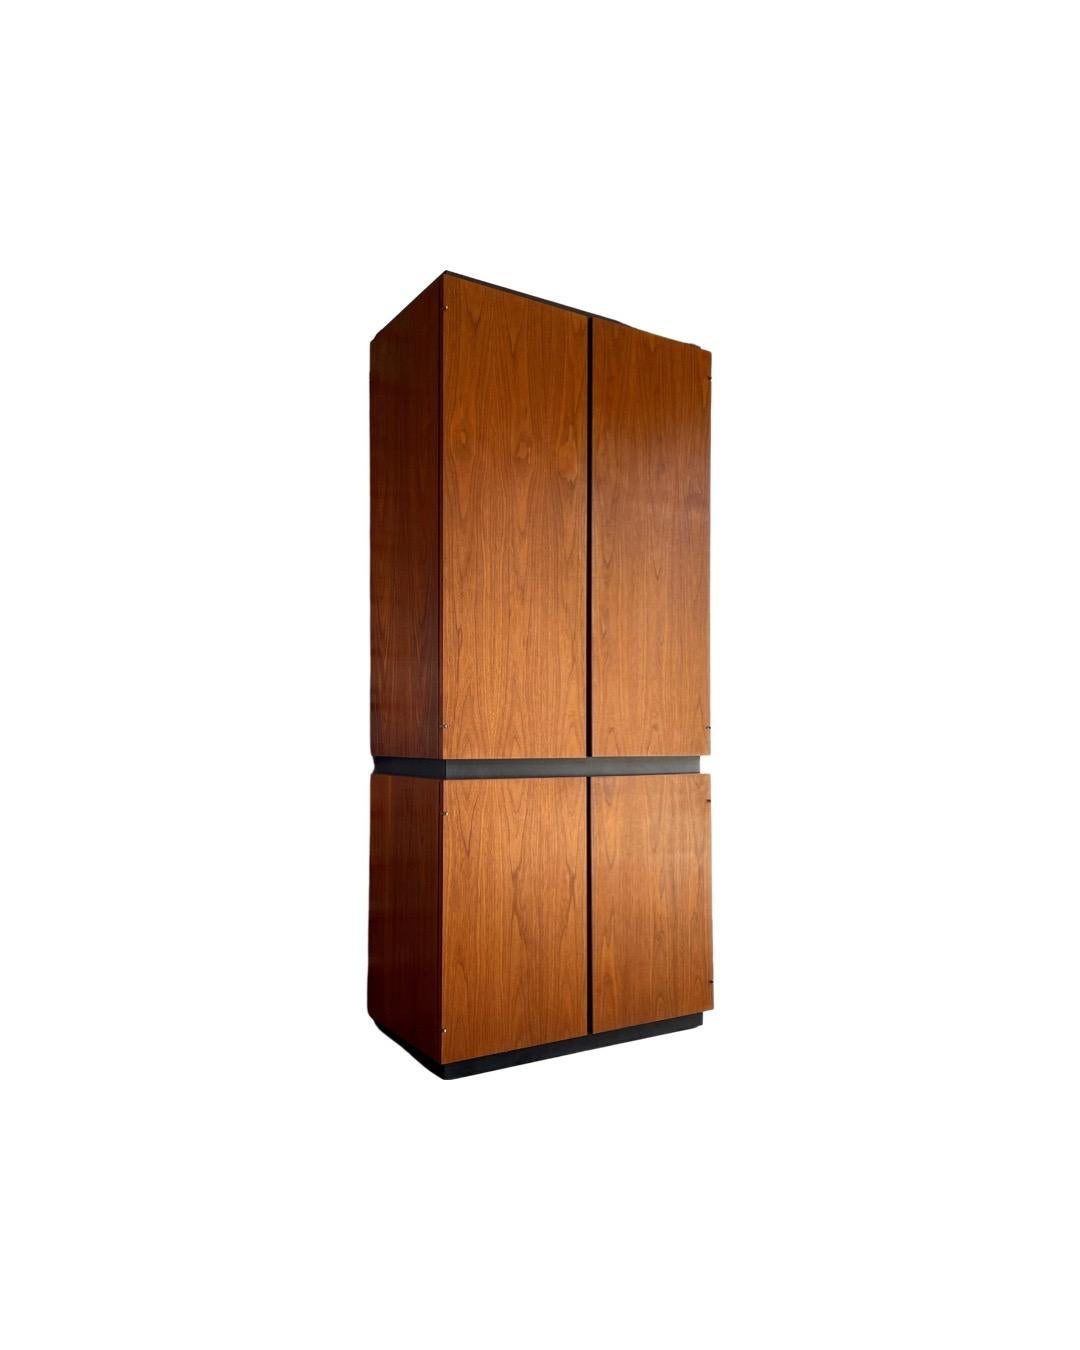 Seldom seen upright HiFi record cabinet stack in American black walnut. Built by Barzilay in California, circa 1970. Solid brass scissor hinges allow the four cabinet doors to open fully and stow flush with the sides of the cabinet. Three